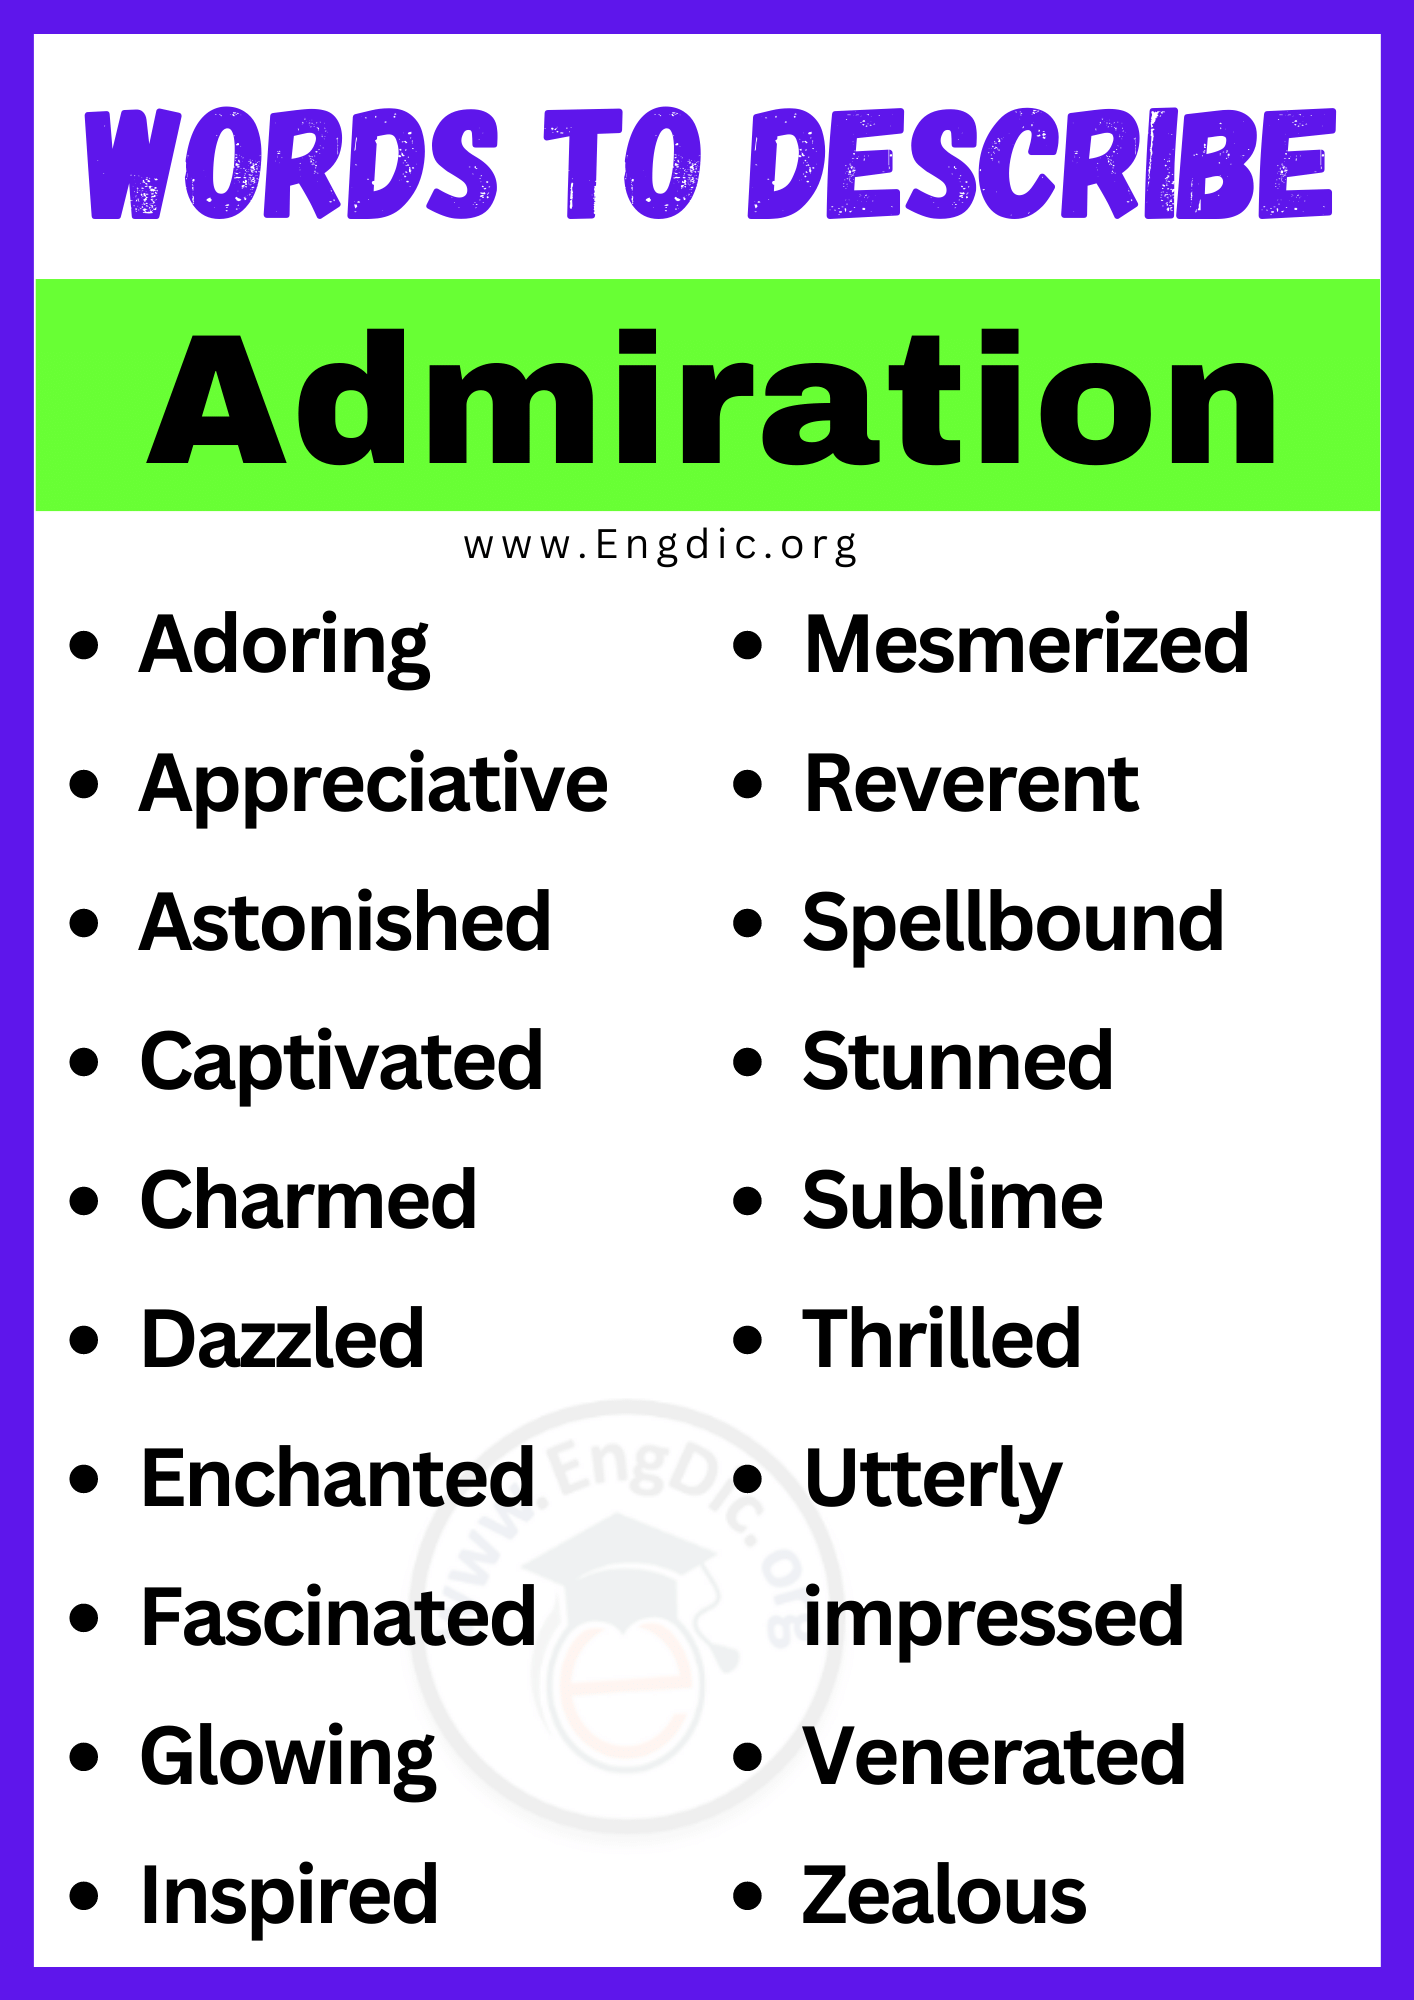 Words to Describe Admiration